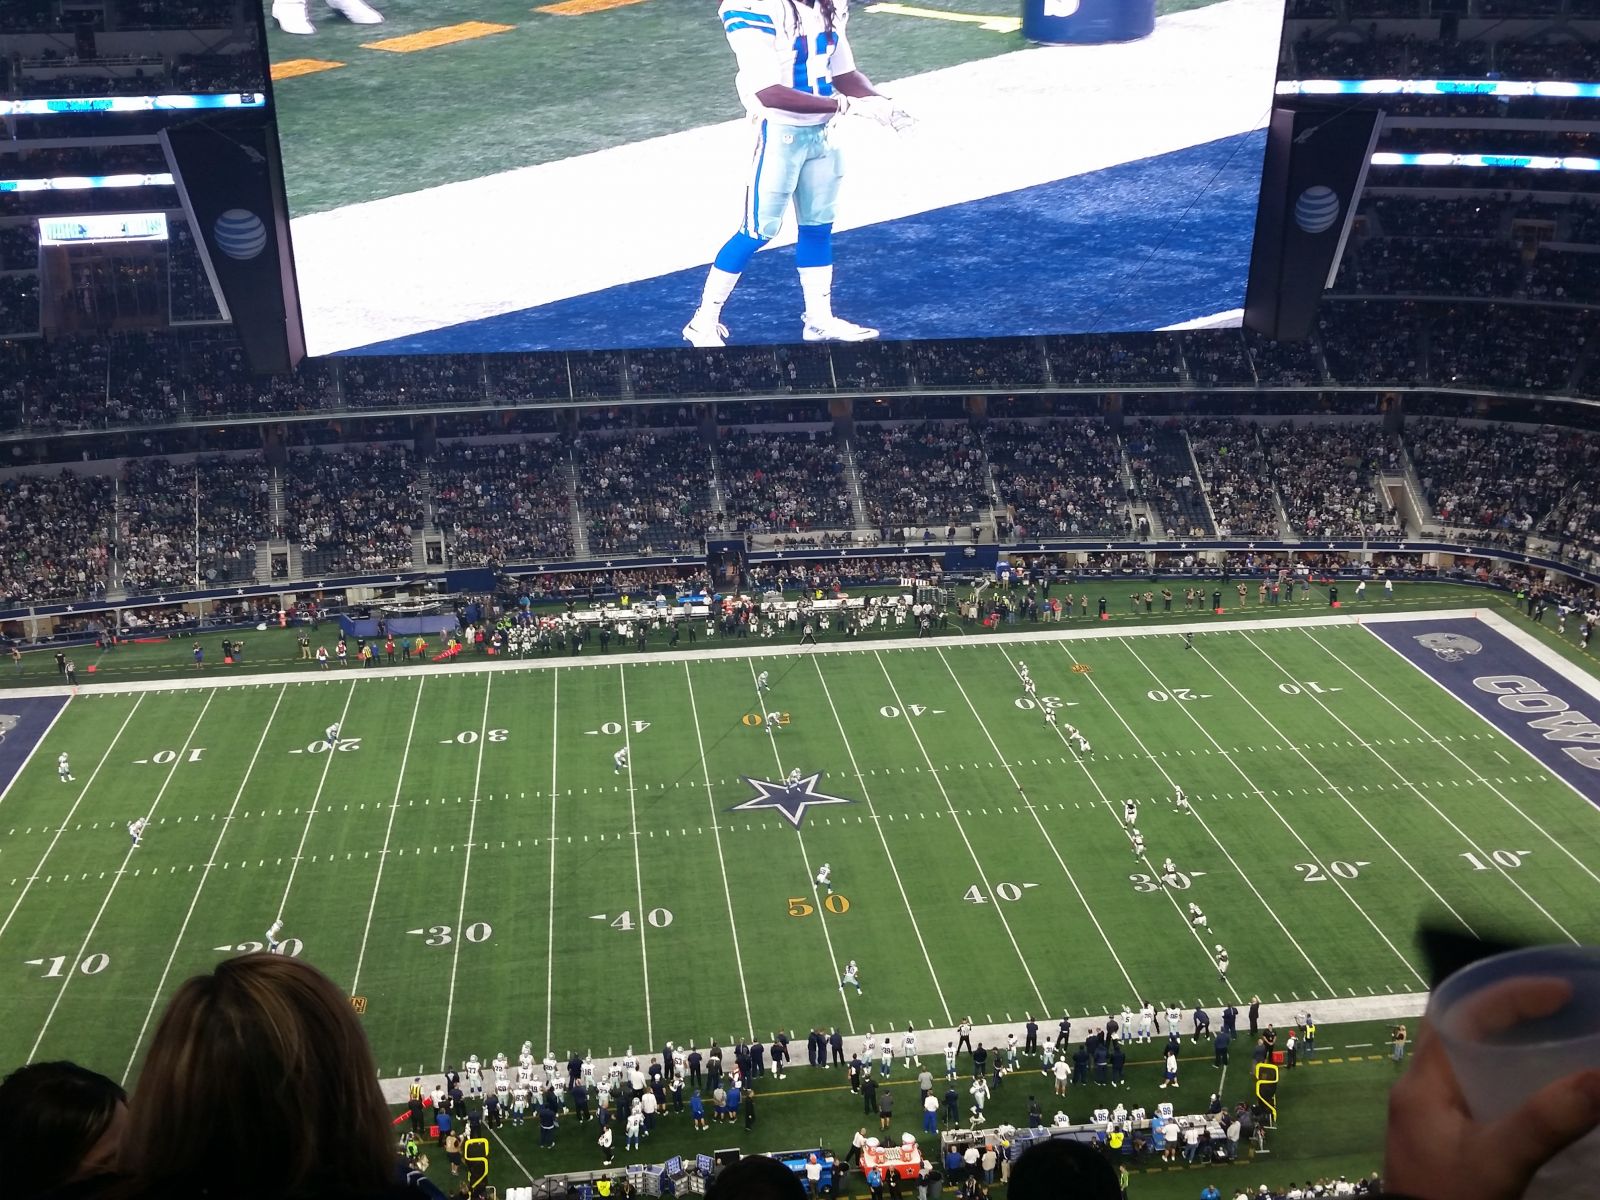 section 413, row 12 seat view  for concert - at&t stadium (cowboys stadium)